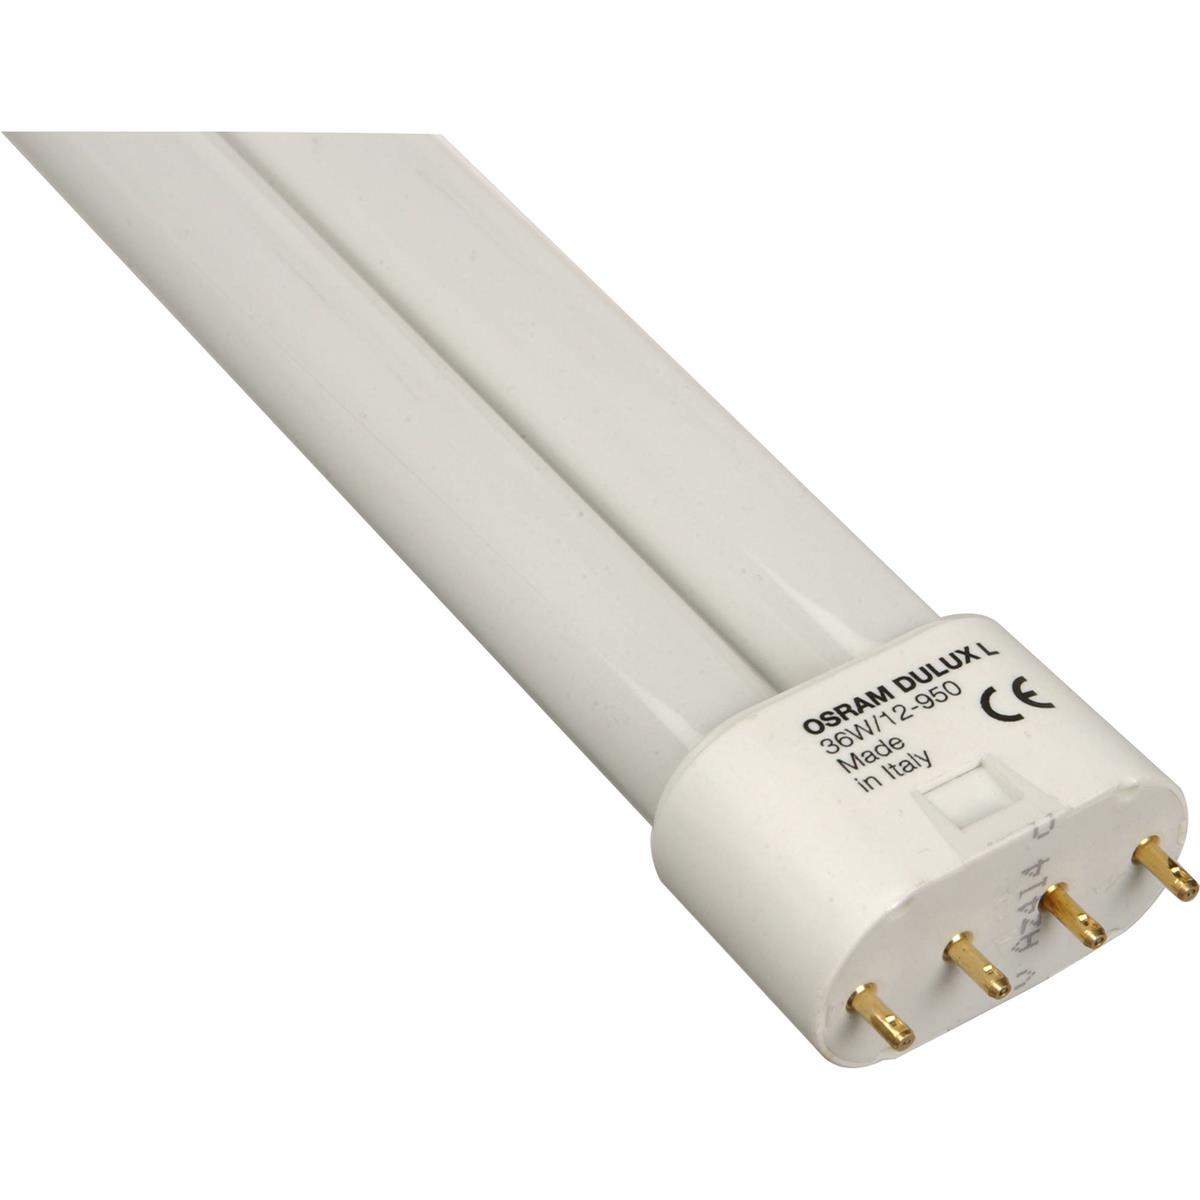 Image of Kaiser Replacement Fluorescent Tube for RB5004 Copy Light